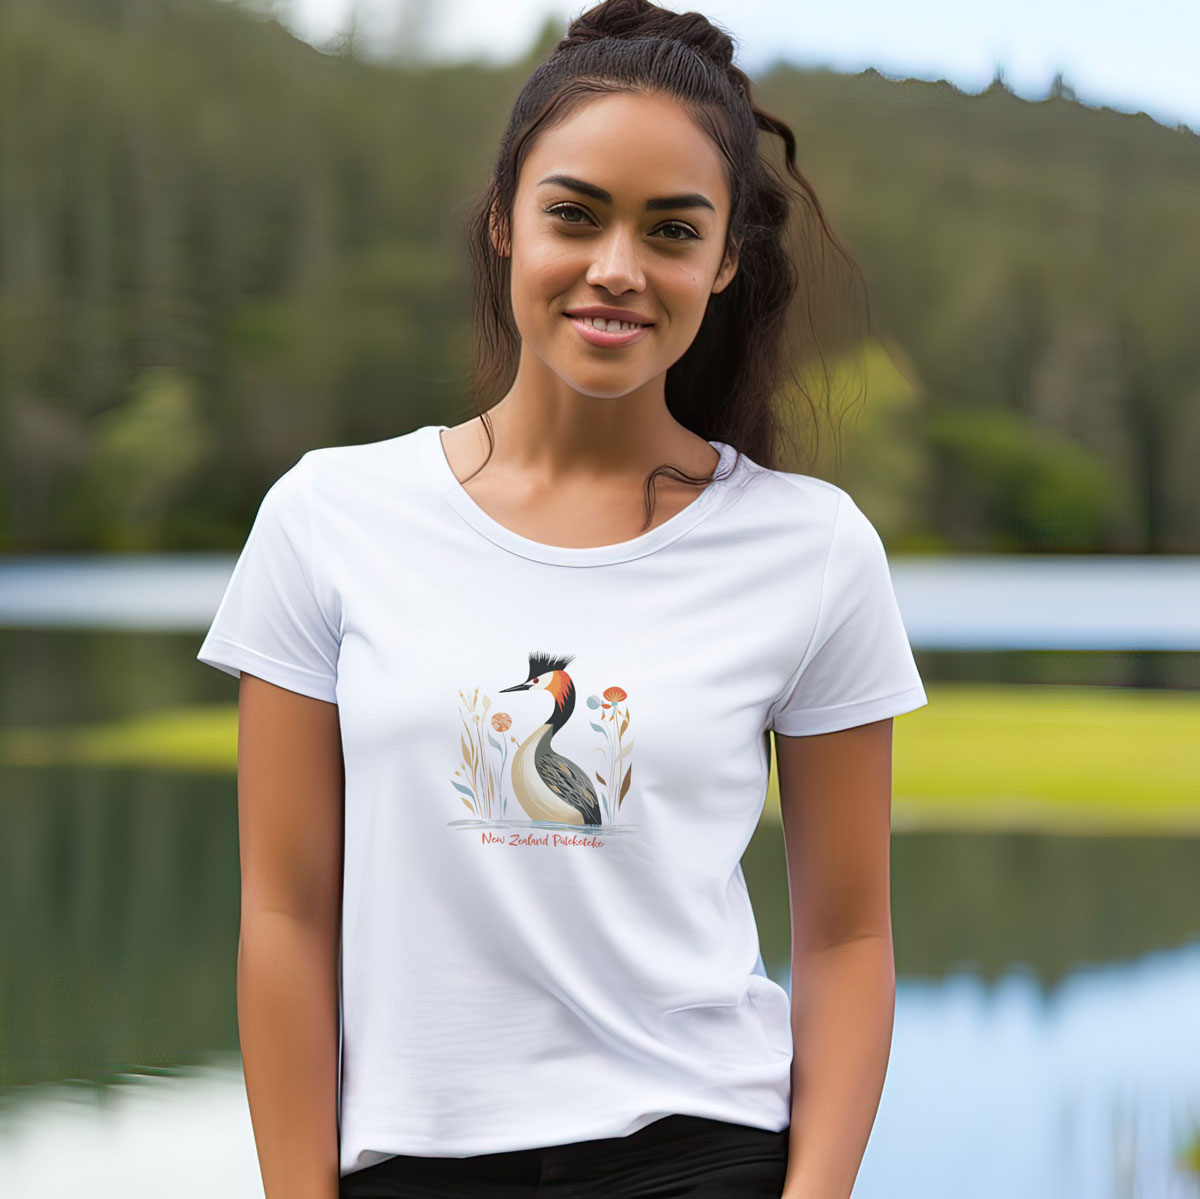 woman standing by a like wearing a white t-shirt with the New Zealand Puteketeke print